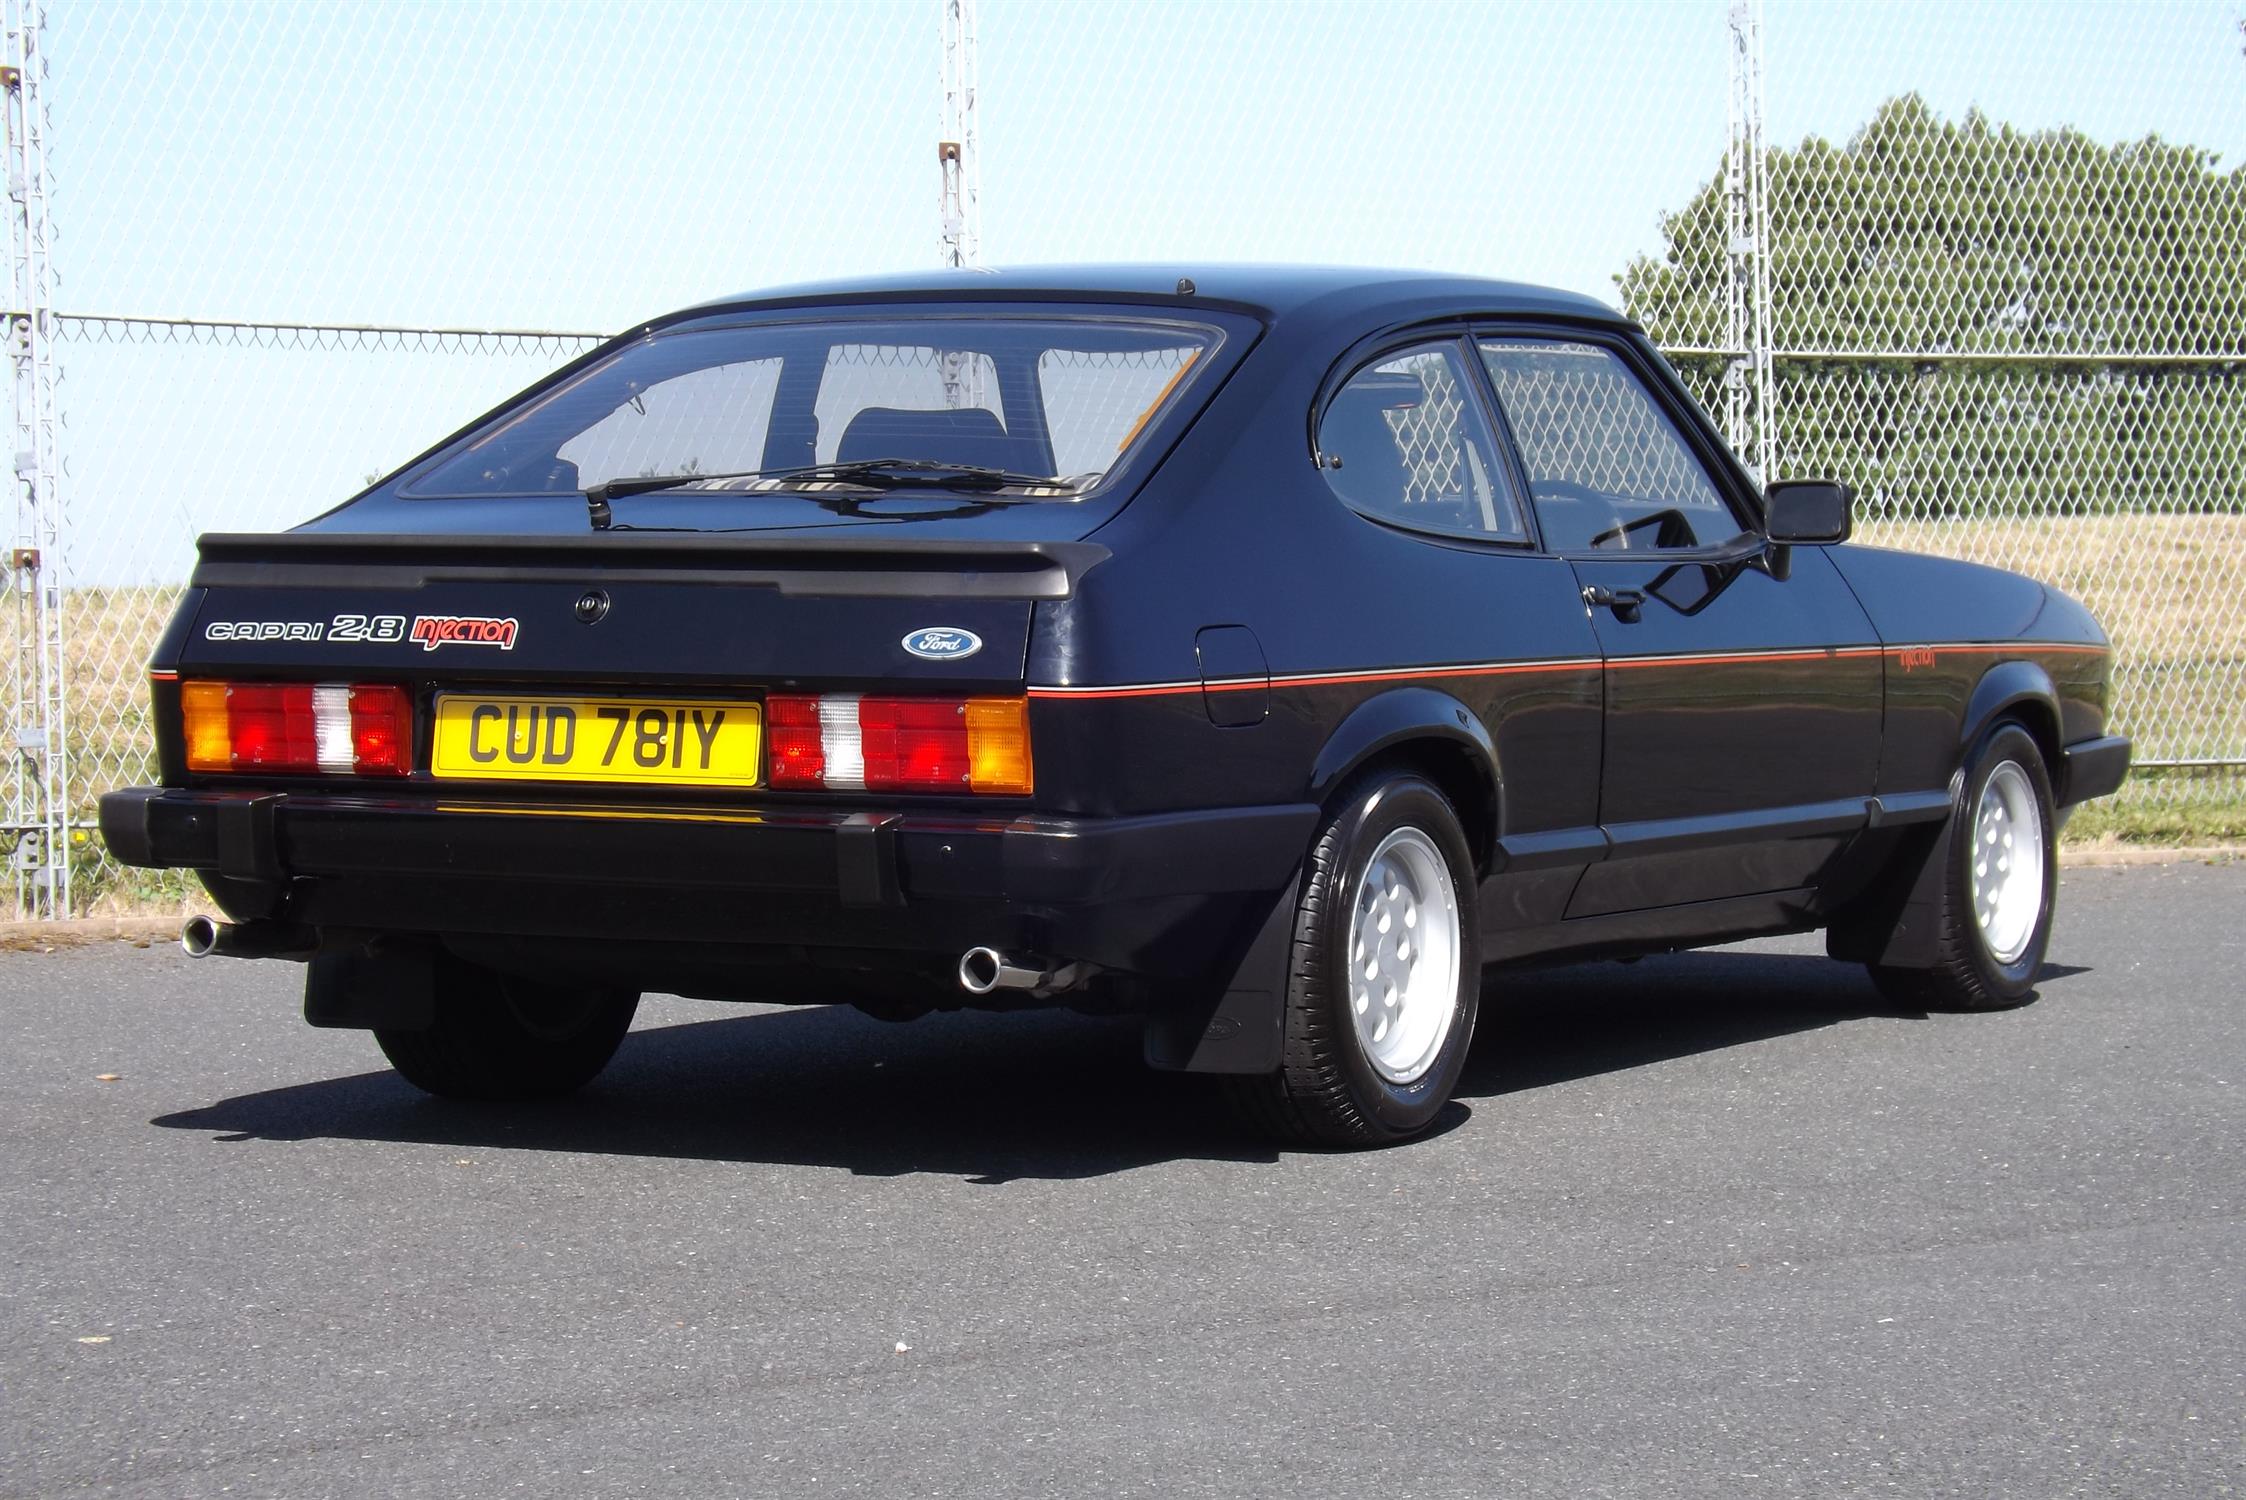 1982 Ford Capri Mk 3 2.8 Injection - Image 5 of 10